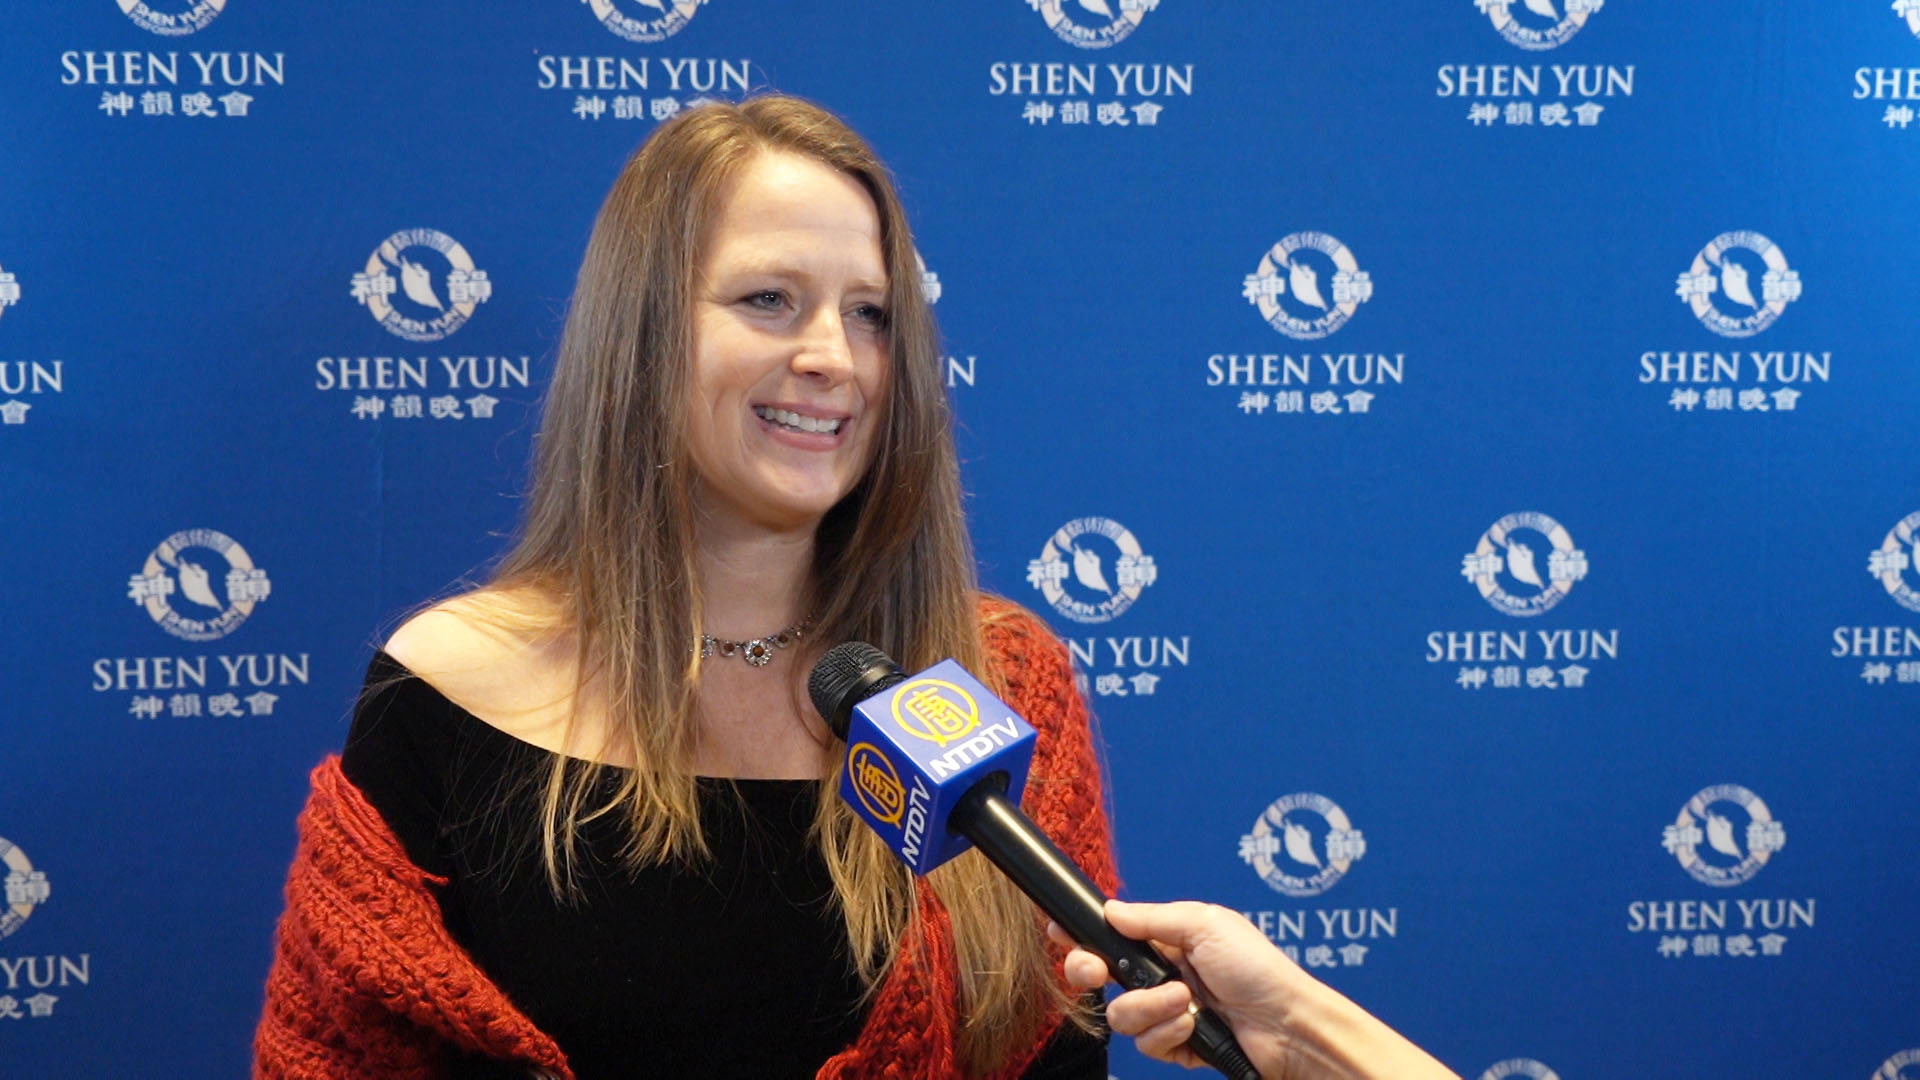 Shen Yun ‘The Perfect Way to Celebrate Christmas’: Atlanta Business Owner